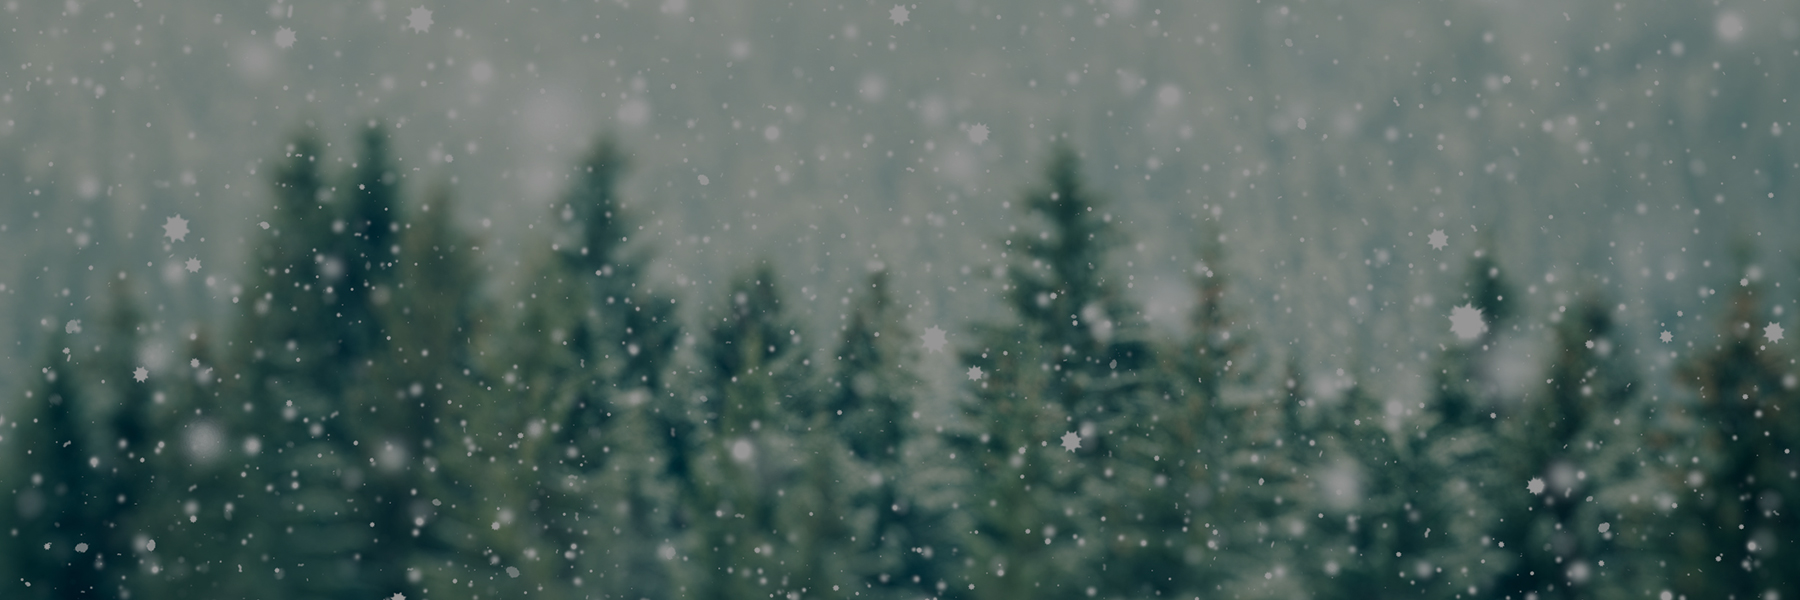 Coniferous tress blurred with snowflakes falling